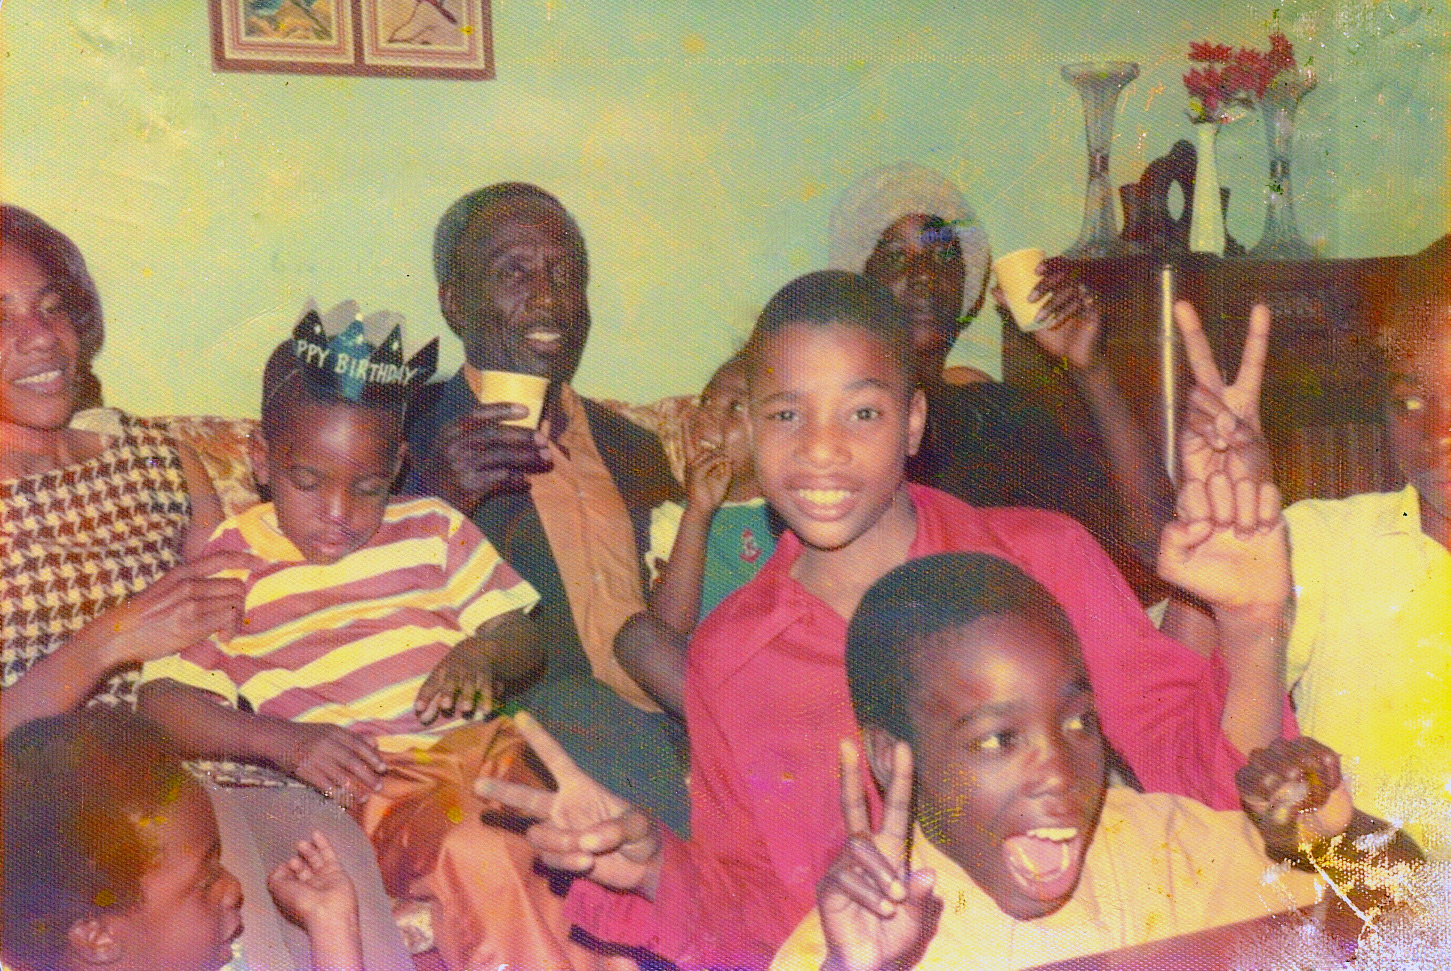 The Warnock family, pictured in 1974, celebrates the birthday of cousin Michael, seated on Verlene Warnock's lap. Future Senator Warnock, bottom left corner, attempts to imitate his older brother's pose while his father Jonathan, seated center, smiles at the camera (Courtesy of Senator Raphael Warnock)